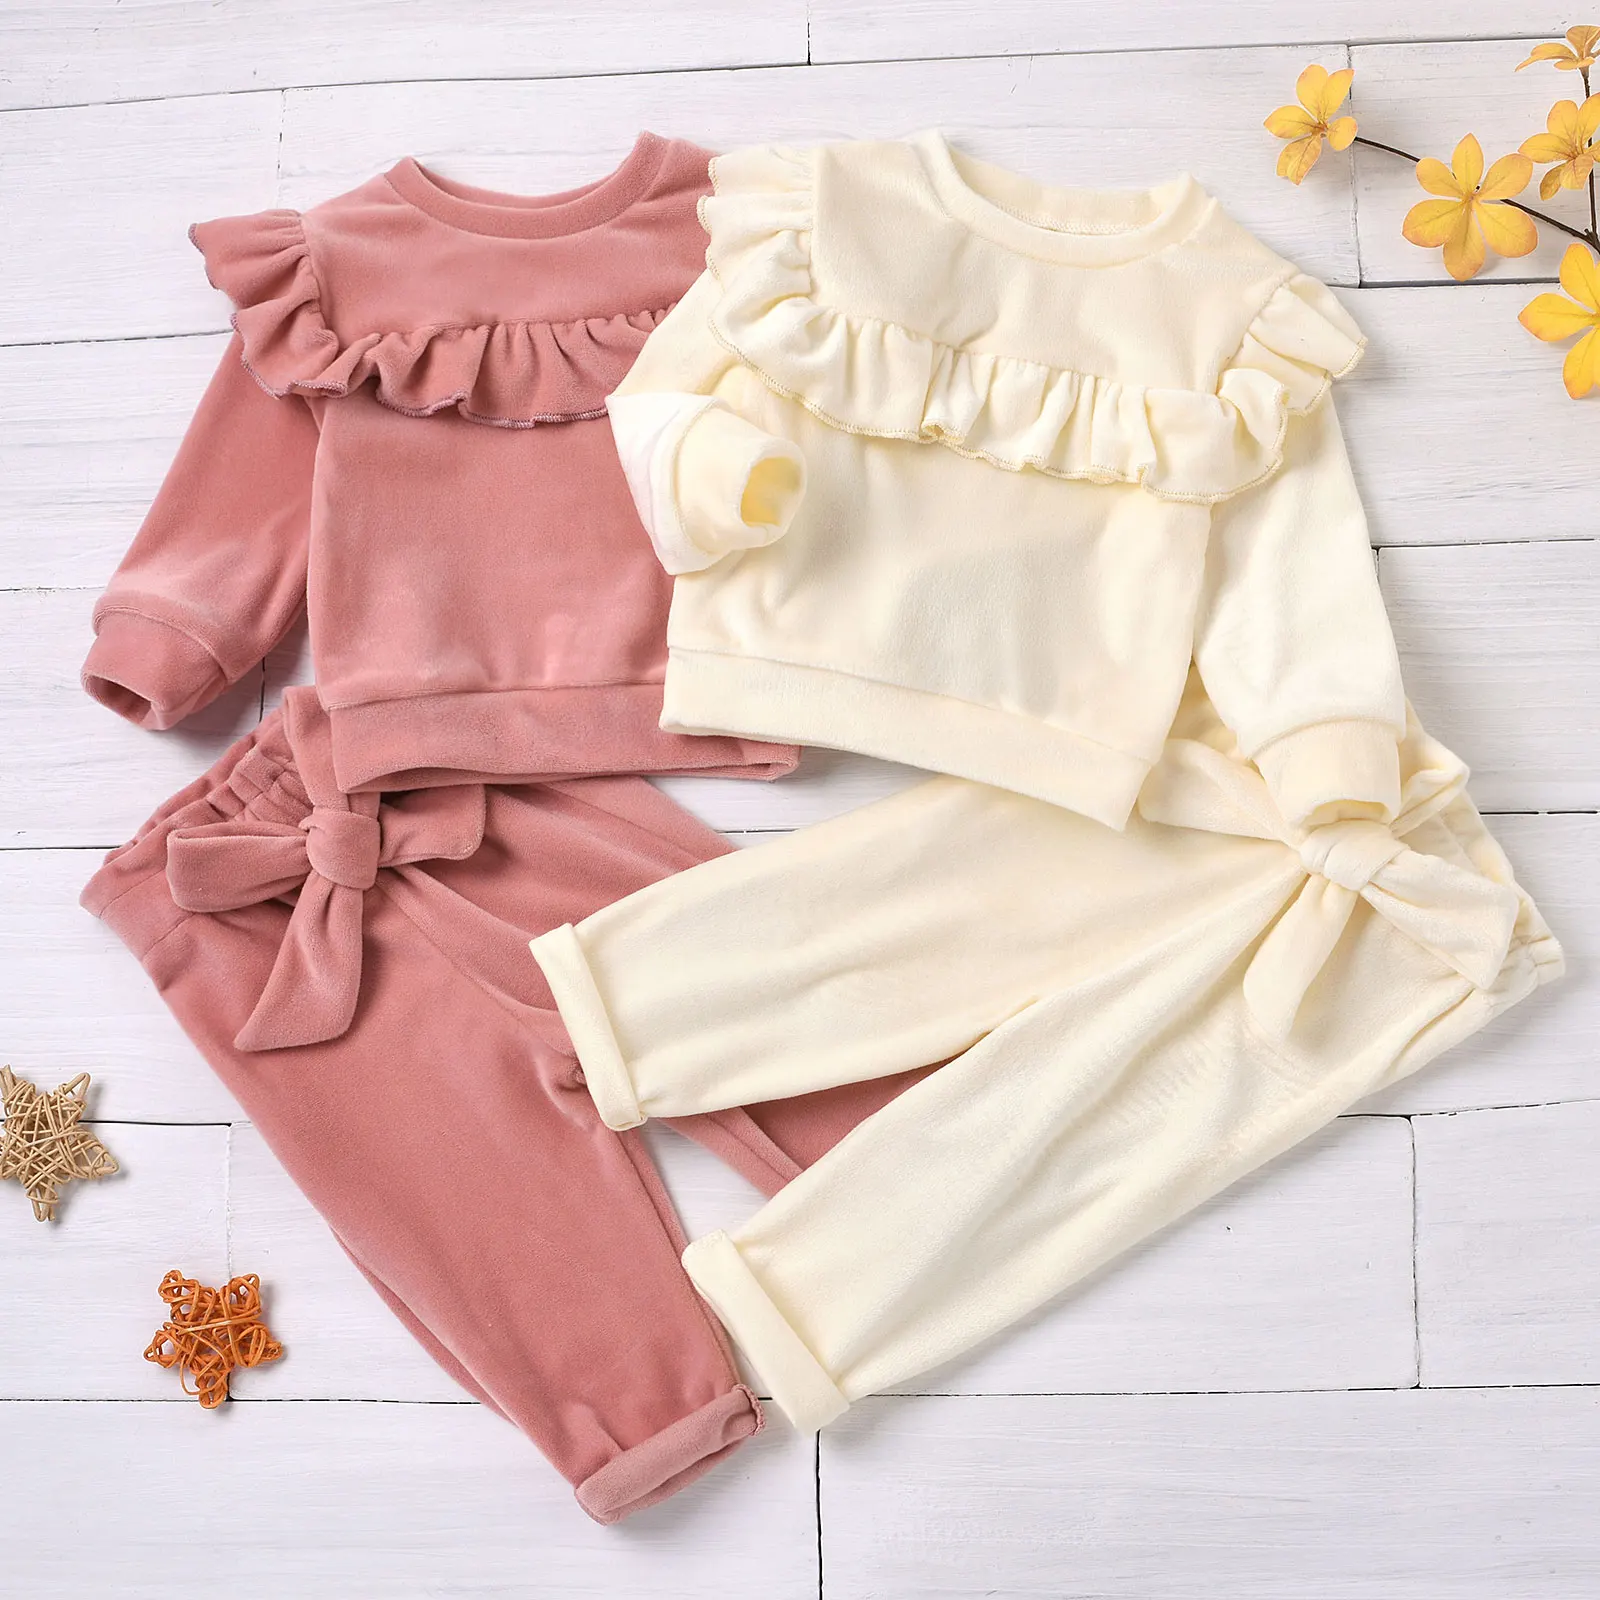 Toddler Baby Girls Clothes Sets Baby 0-12M Autumn Winter Warm Smooth Velvet Outfits Ruffle Trim Top Bow Pants Tracksuits Kids enlarge